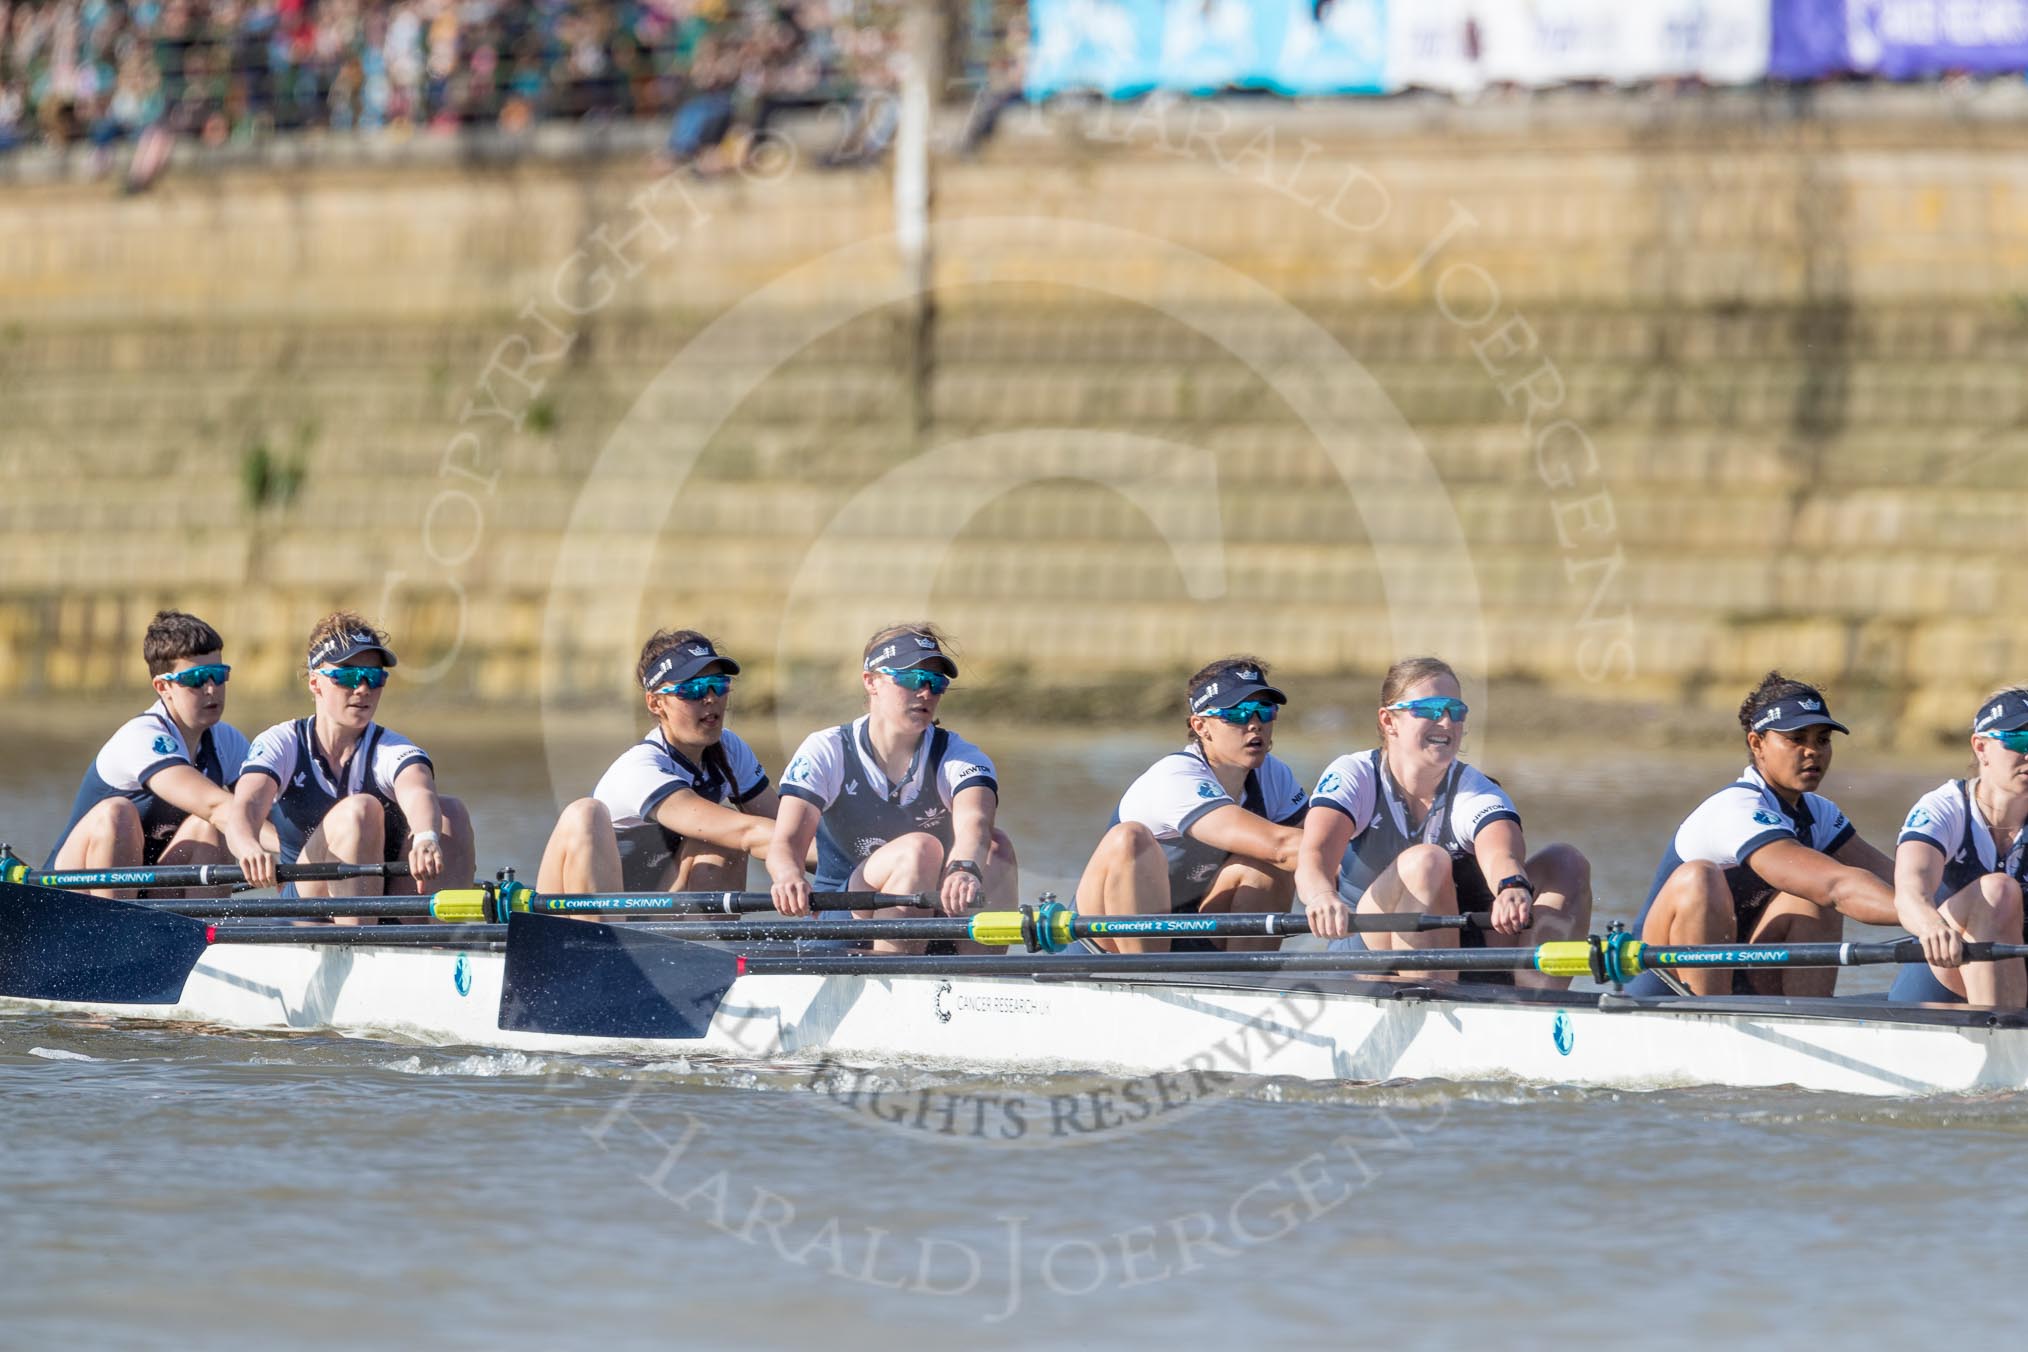 The Boat Race season 2017 -  The Cancer Research Women's Boat Race: OUWBC working hard to catch up with Cambridge, here bow Alice Roberts, 2 Flo Pickles, 3 Rebecca Te Water Naudé, 4 Rebecca Esselstein, 5 Chloe Laverack, 6 Harriet Austin, 7 Jenna Hebert, stroke Emily Cameron.
River Thames between Putney Bridge and Mortlake,
London SW15,

United Kingdom,
on 02 April 2017 at 16:36, image #132